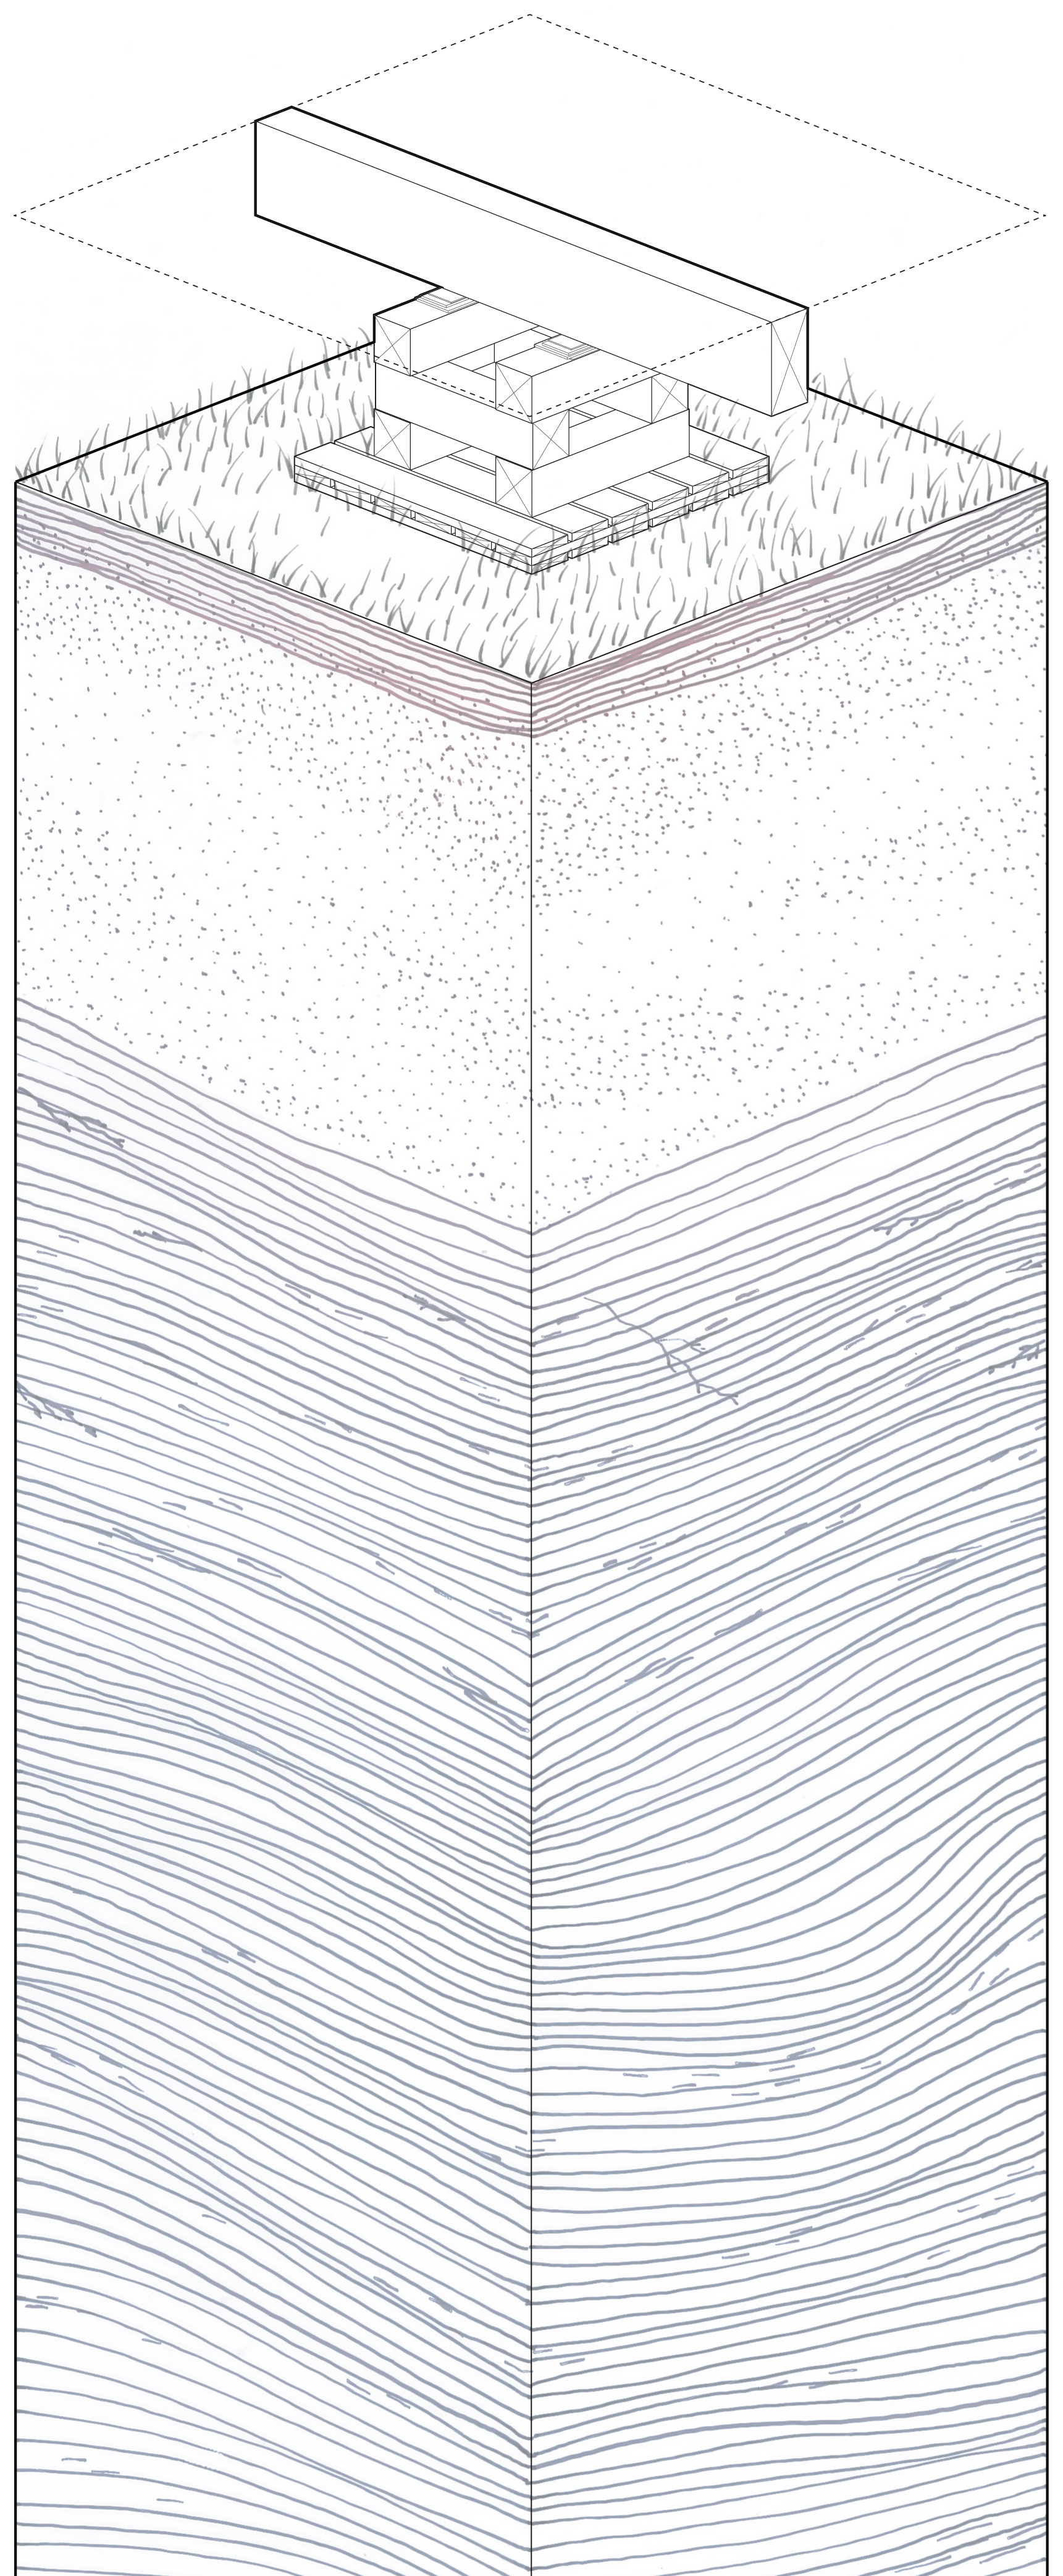 Image 3: Surface foundation system on permafrost (Rendering adapted from CMHC)